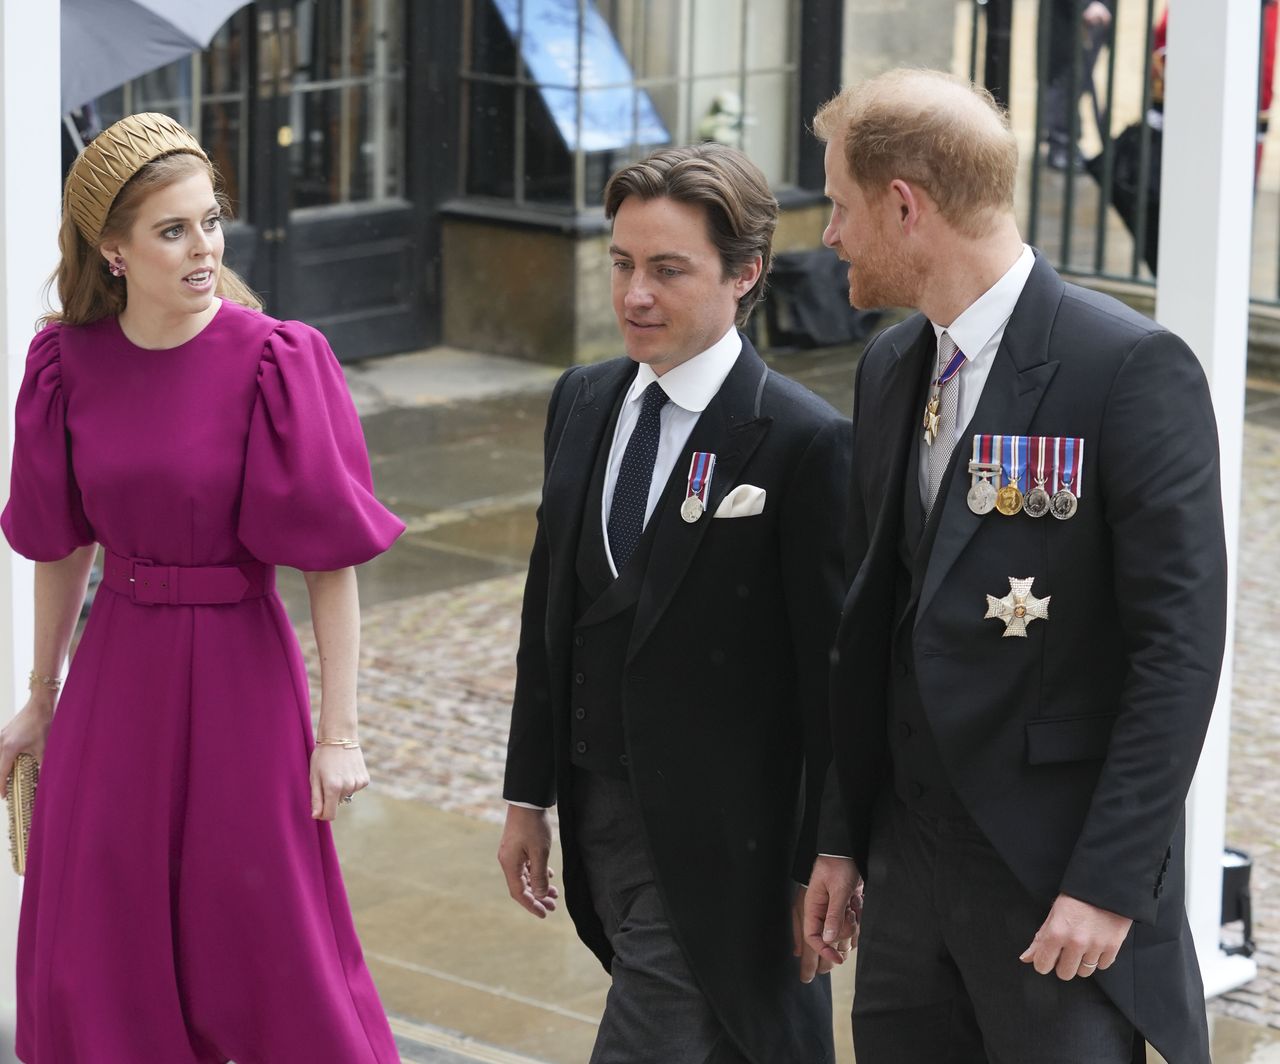 Prince Harry Wasn’t on the Buckingham Palace Balcony, But Reportedly ...